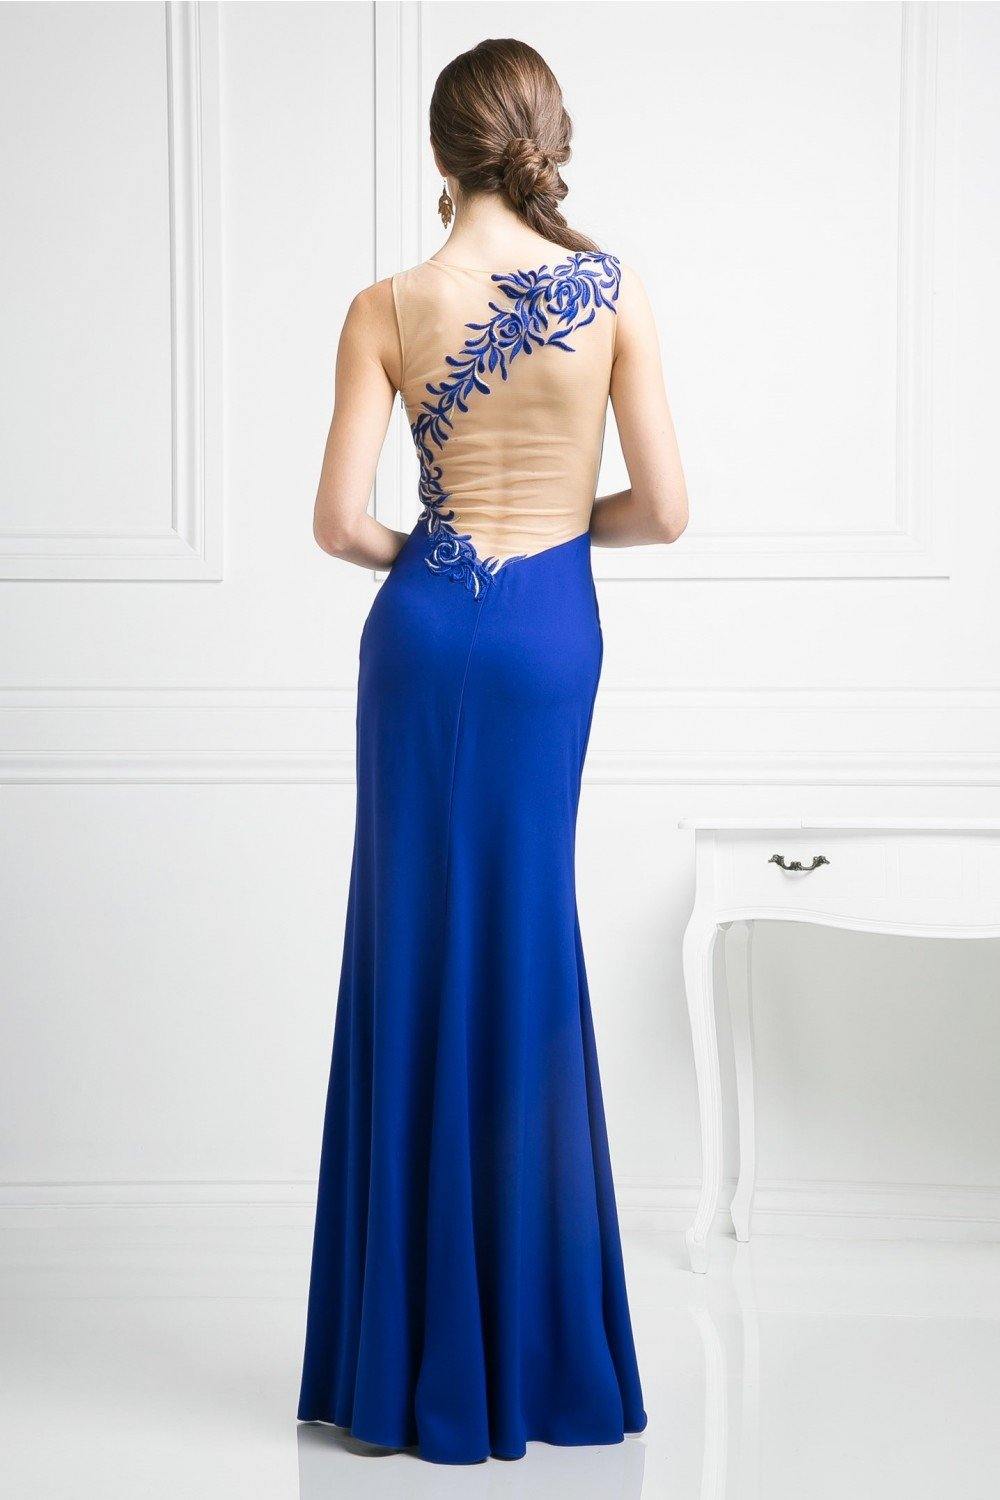 Formal Long Fitted Dress - The Dress Outlet